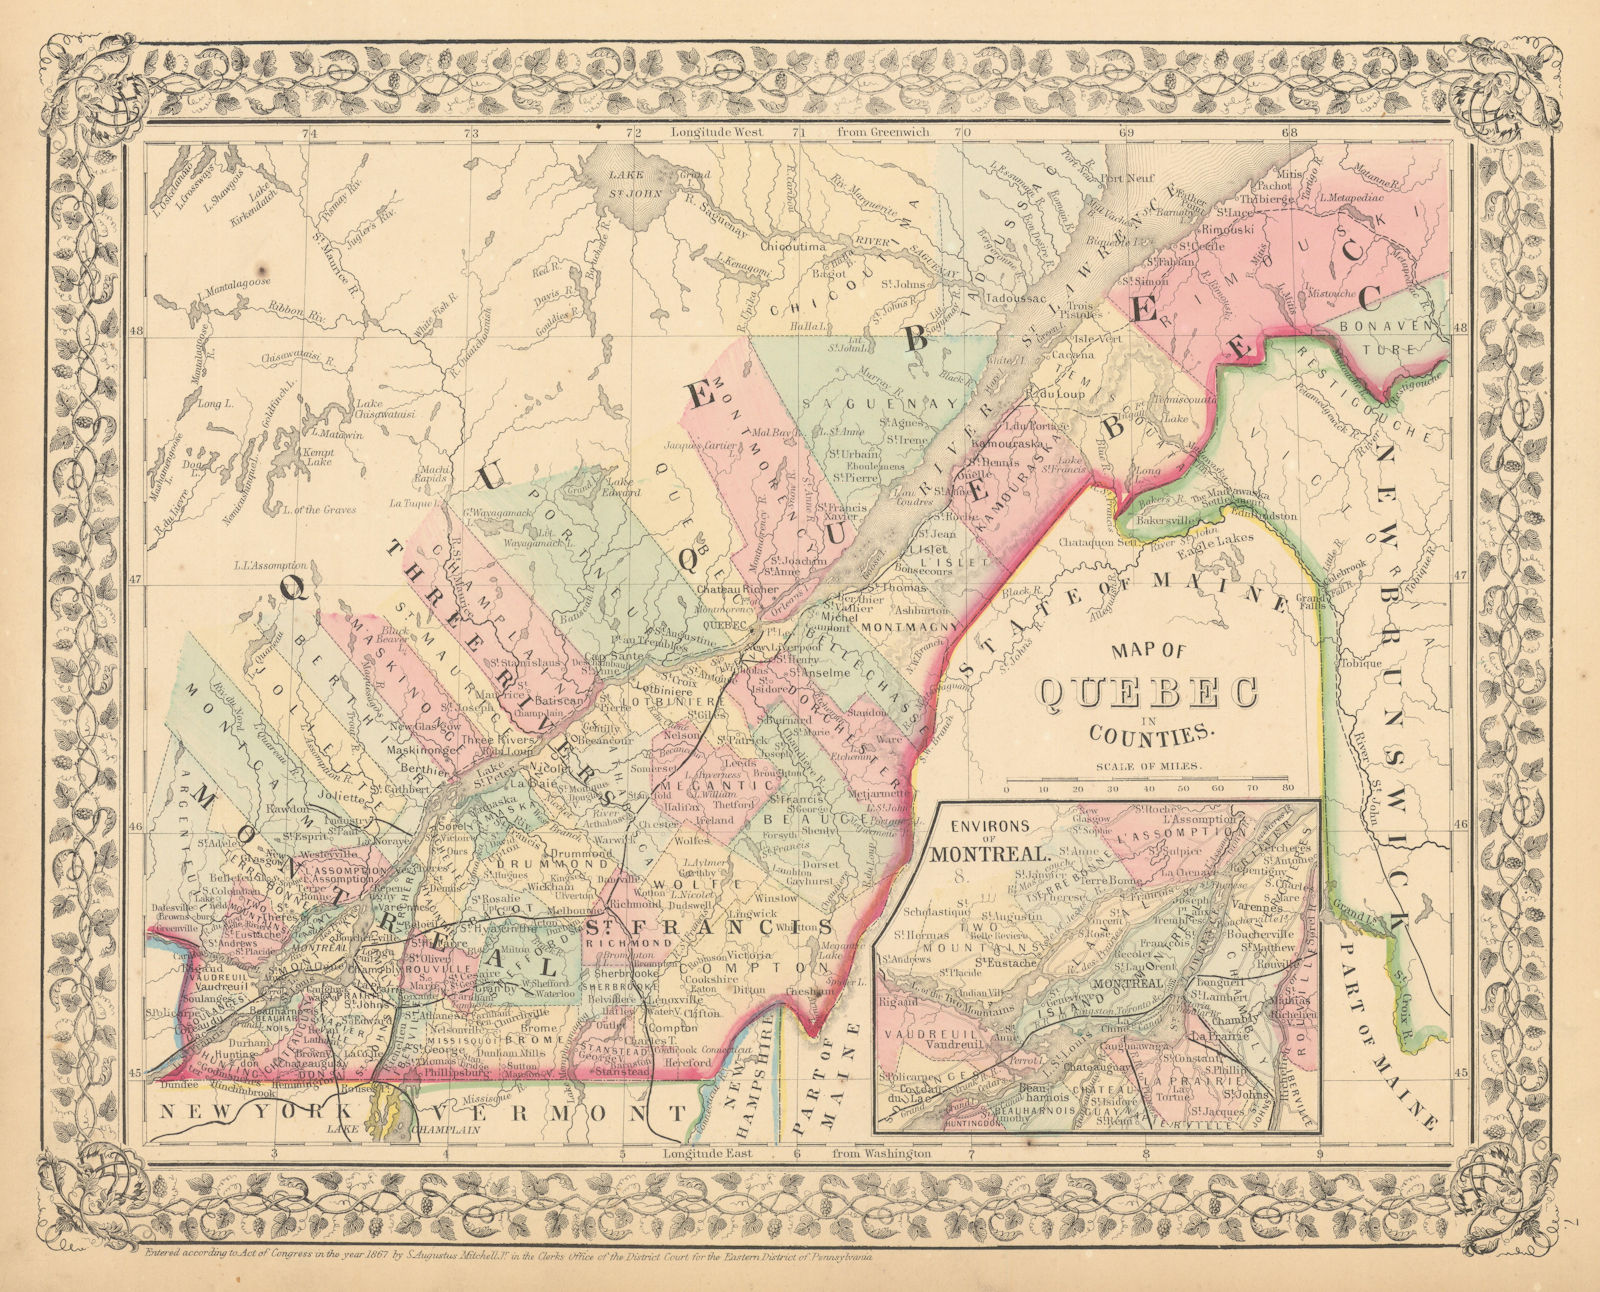 Associate Product Map of Quebec in Counties. Montreal. St. Lawrence. Canada. MITCHELL 1869